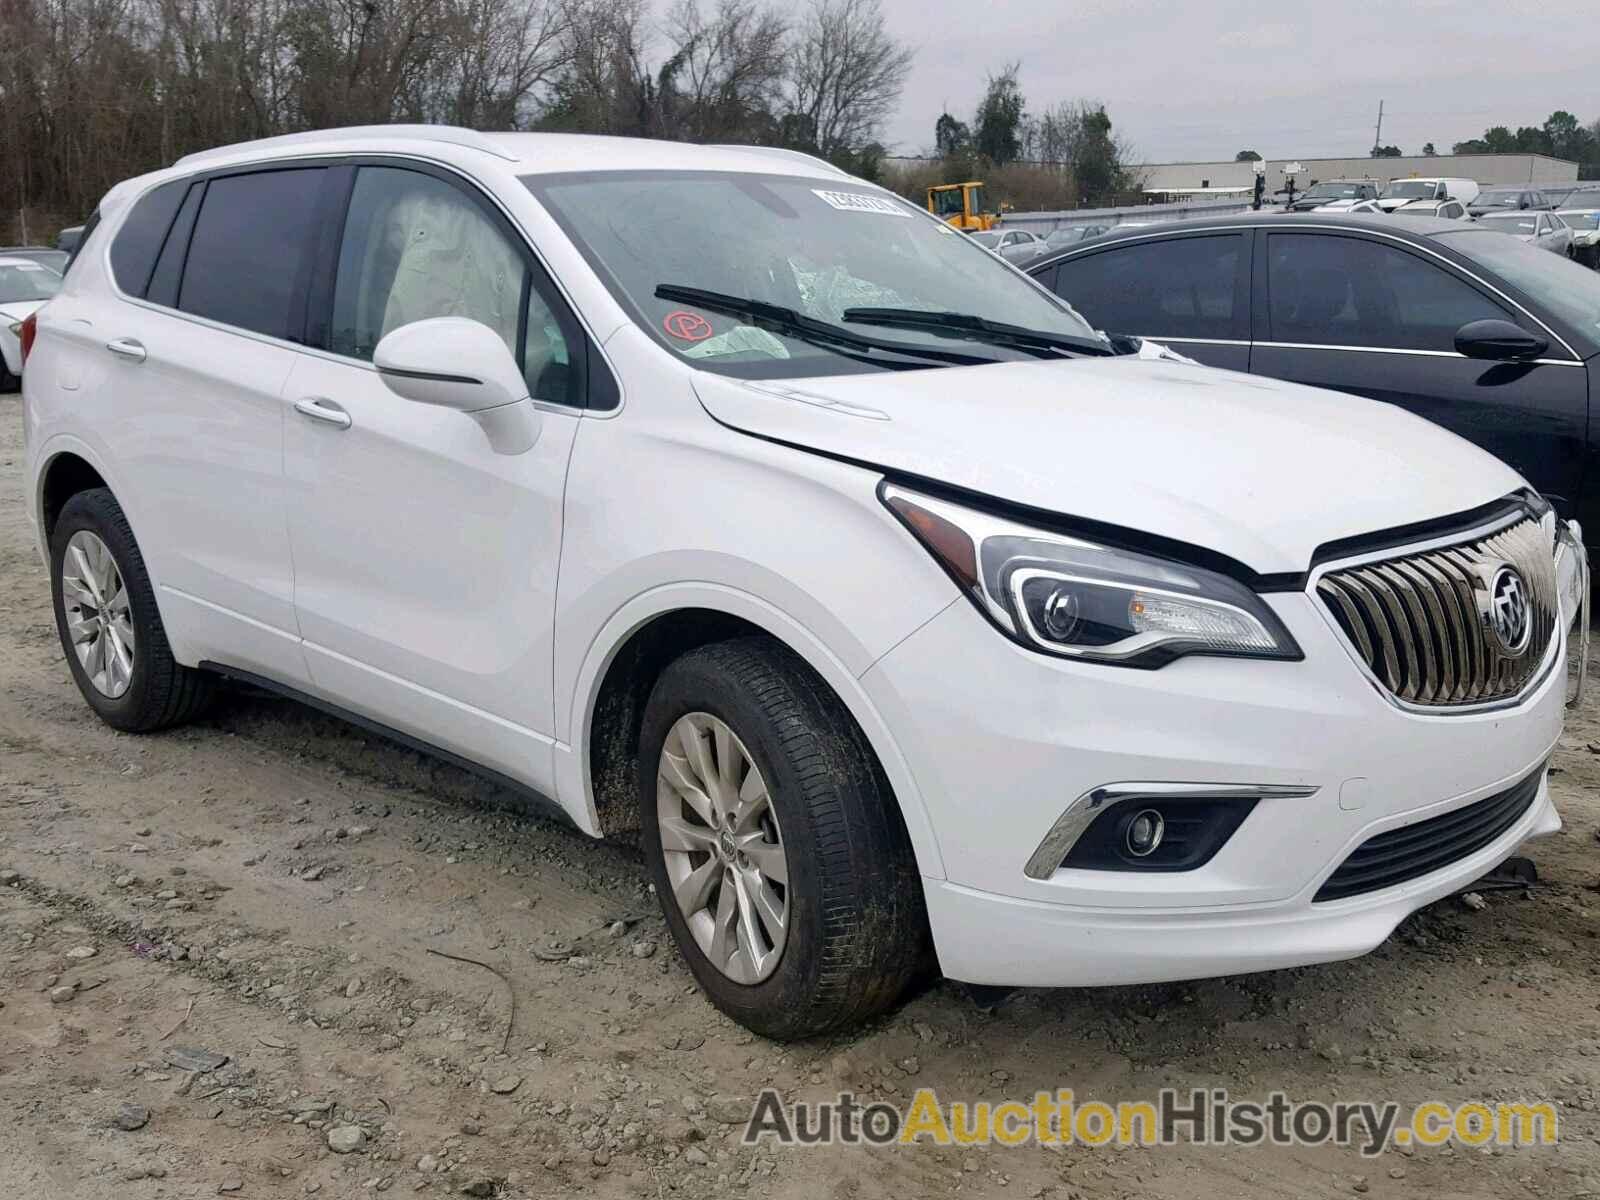 2017 BUICK ENVISION CONVENIENCE, LRBFXBSA9HD217573